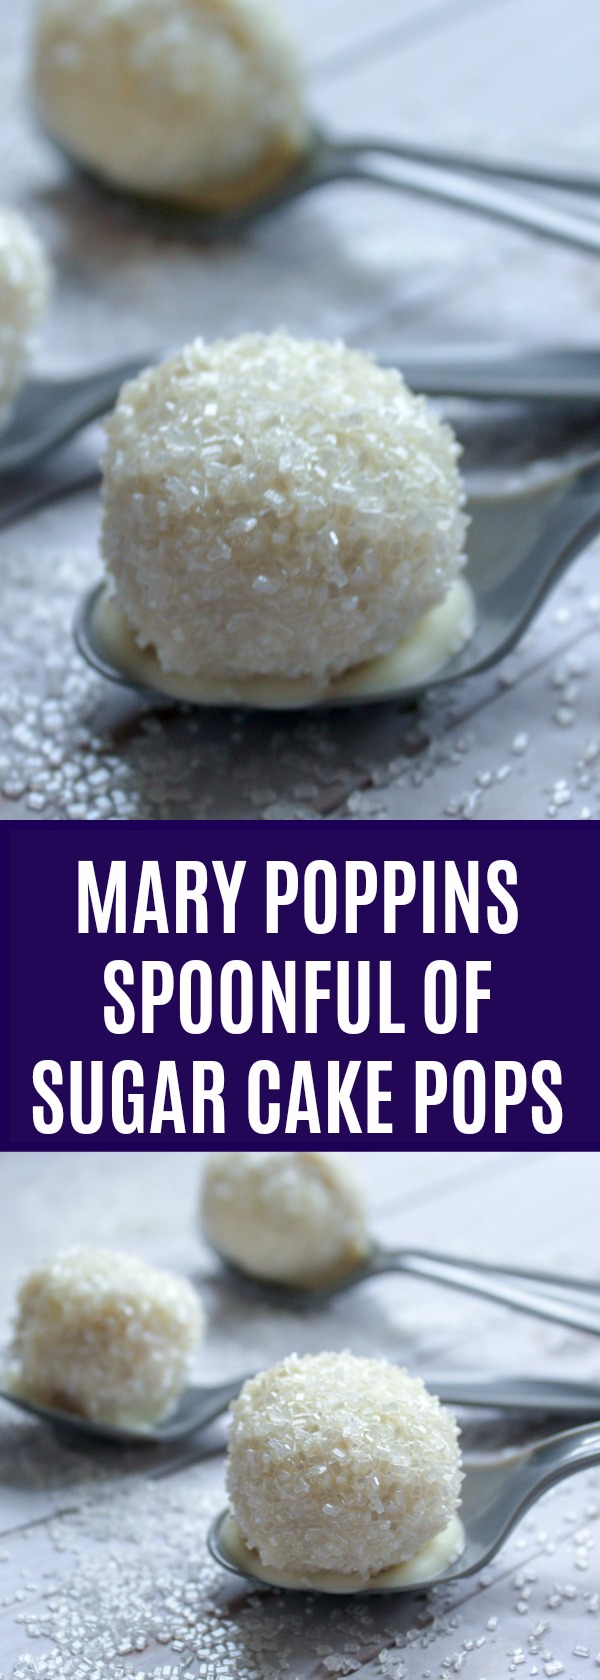 Mary Poppins Spoonful of Sugar Cake Pops